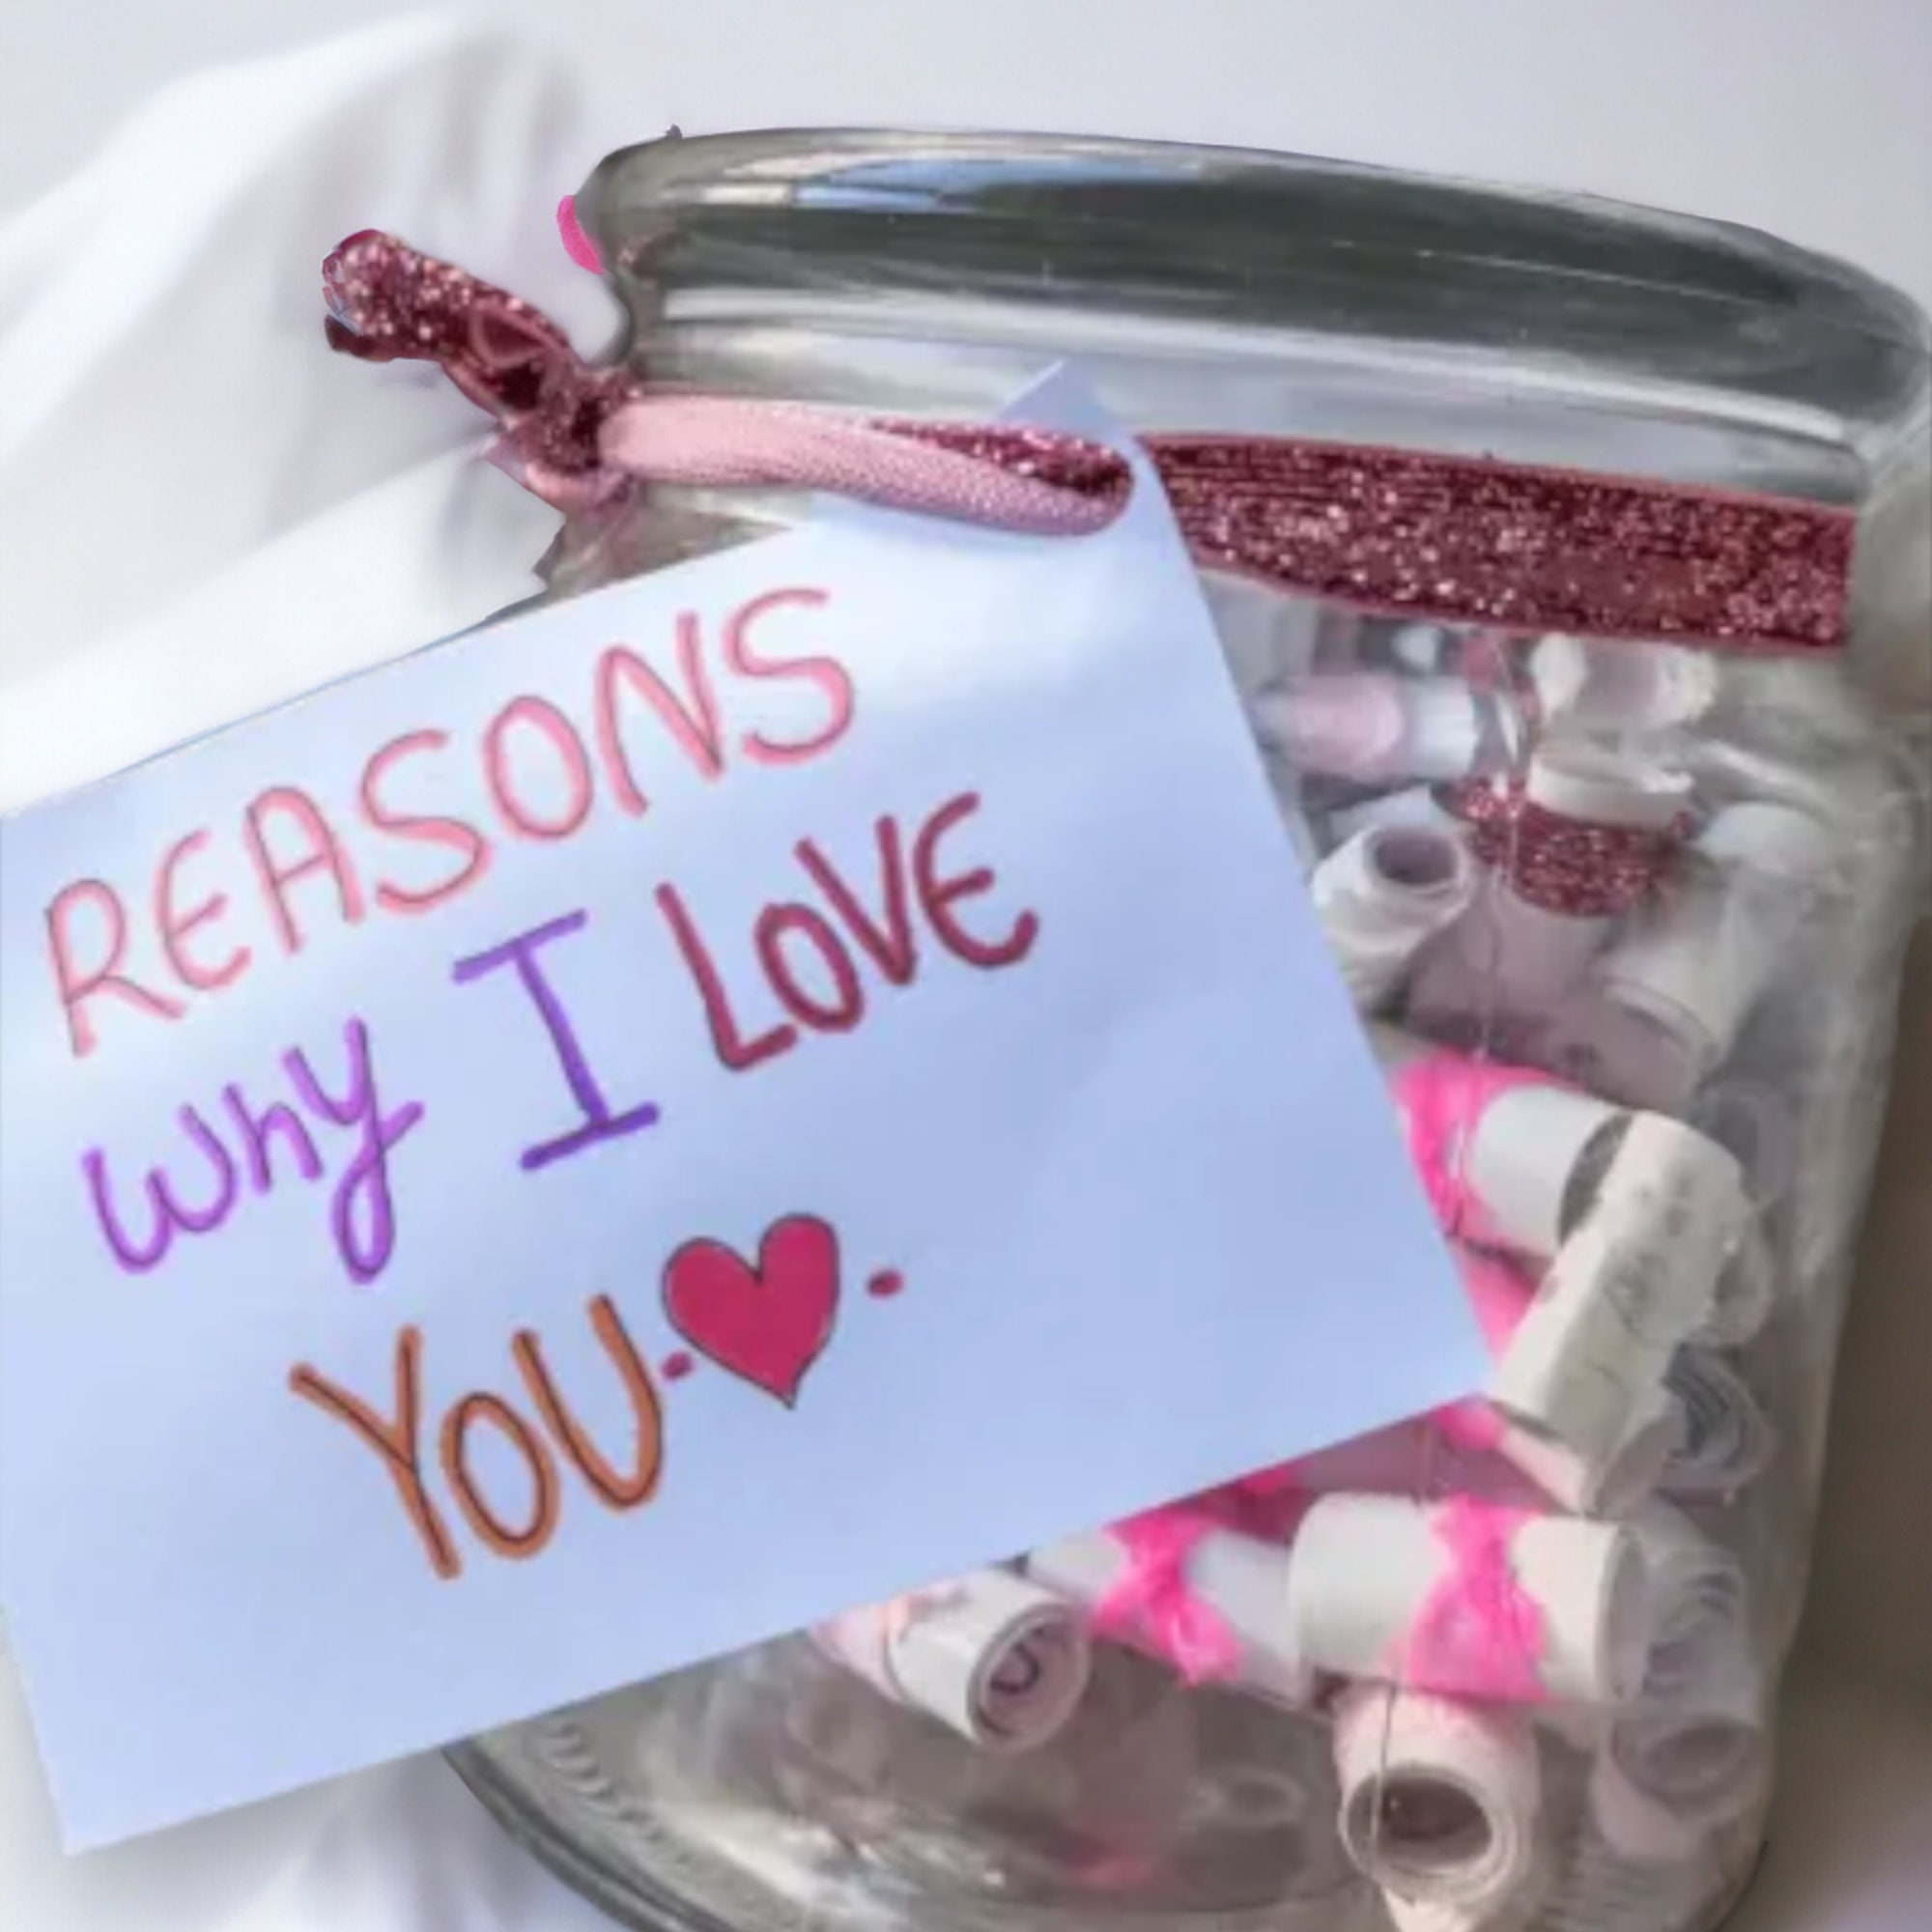 100 Reasons Why I Love You Jar Love Notes Romantic Gifts for Him